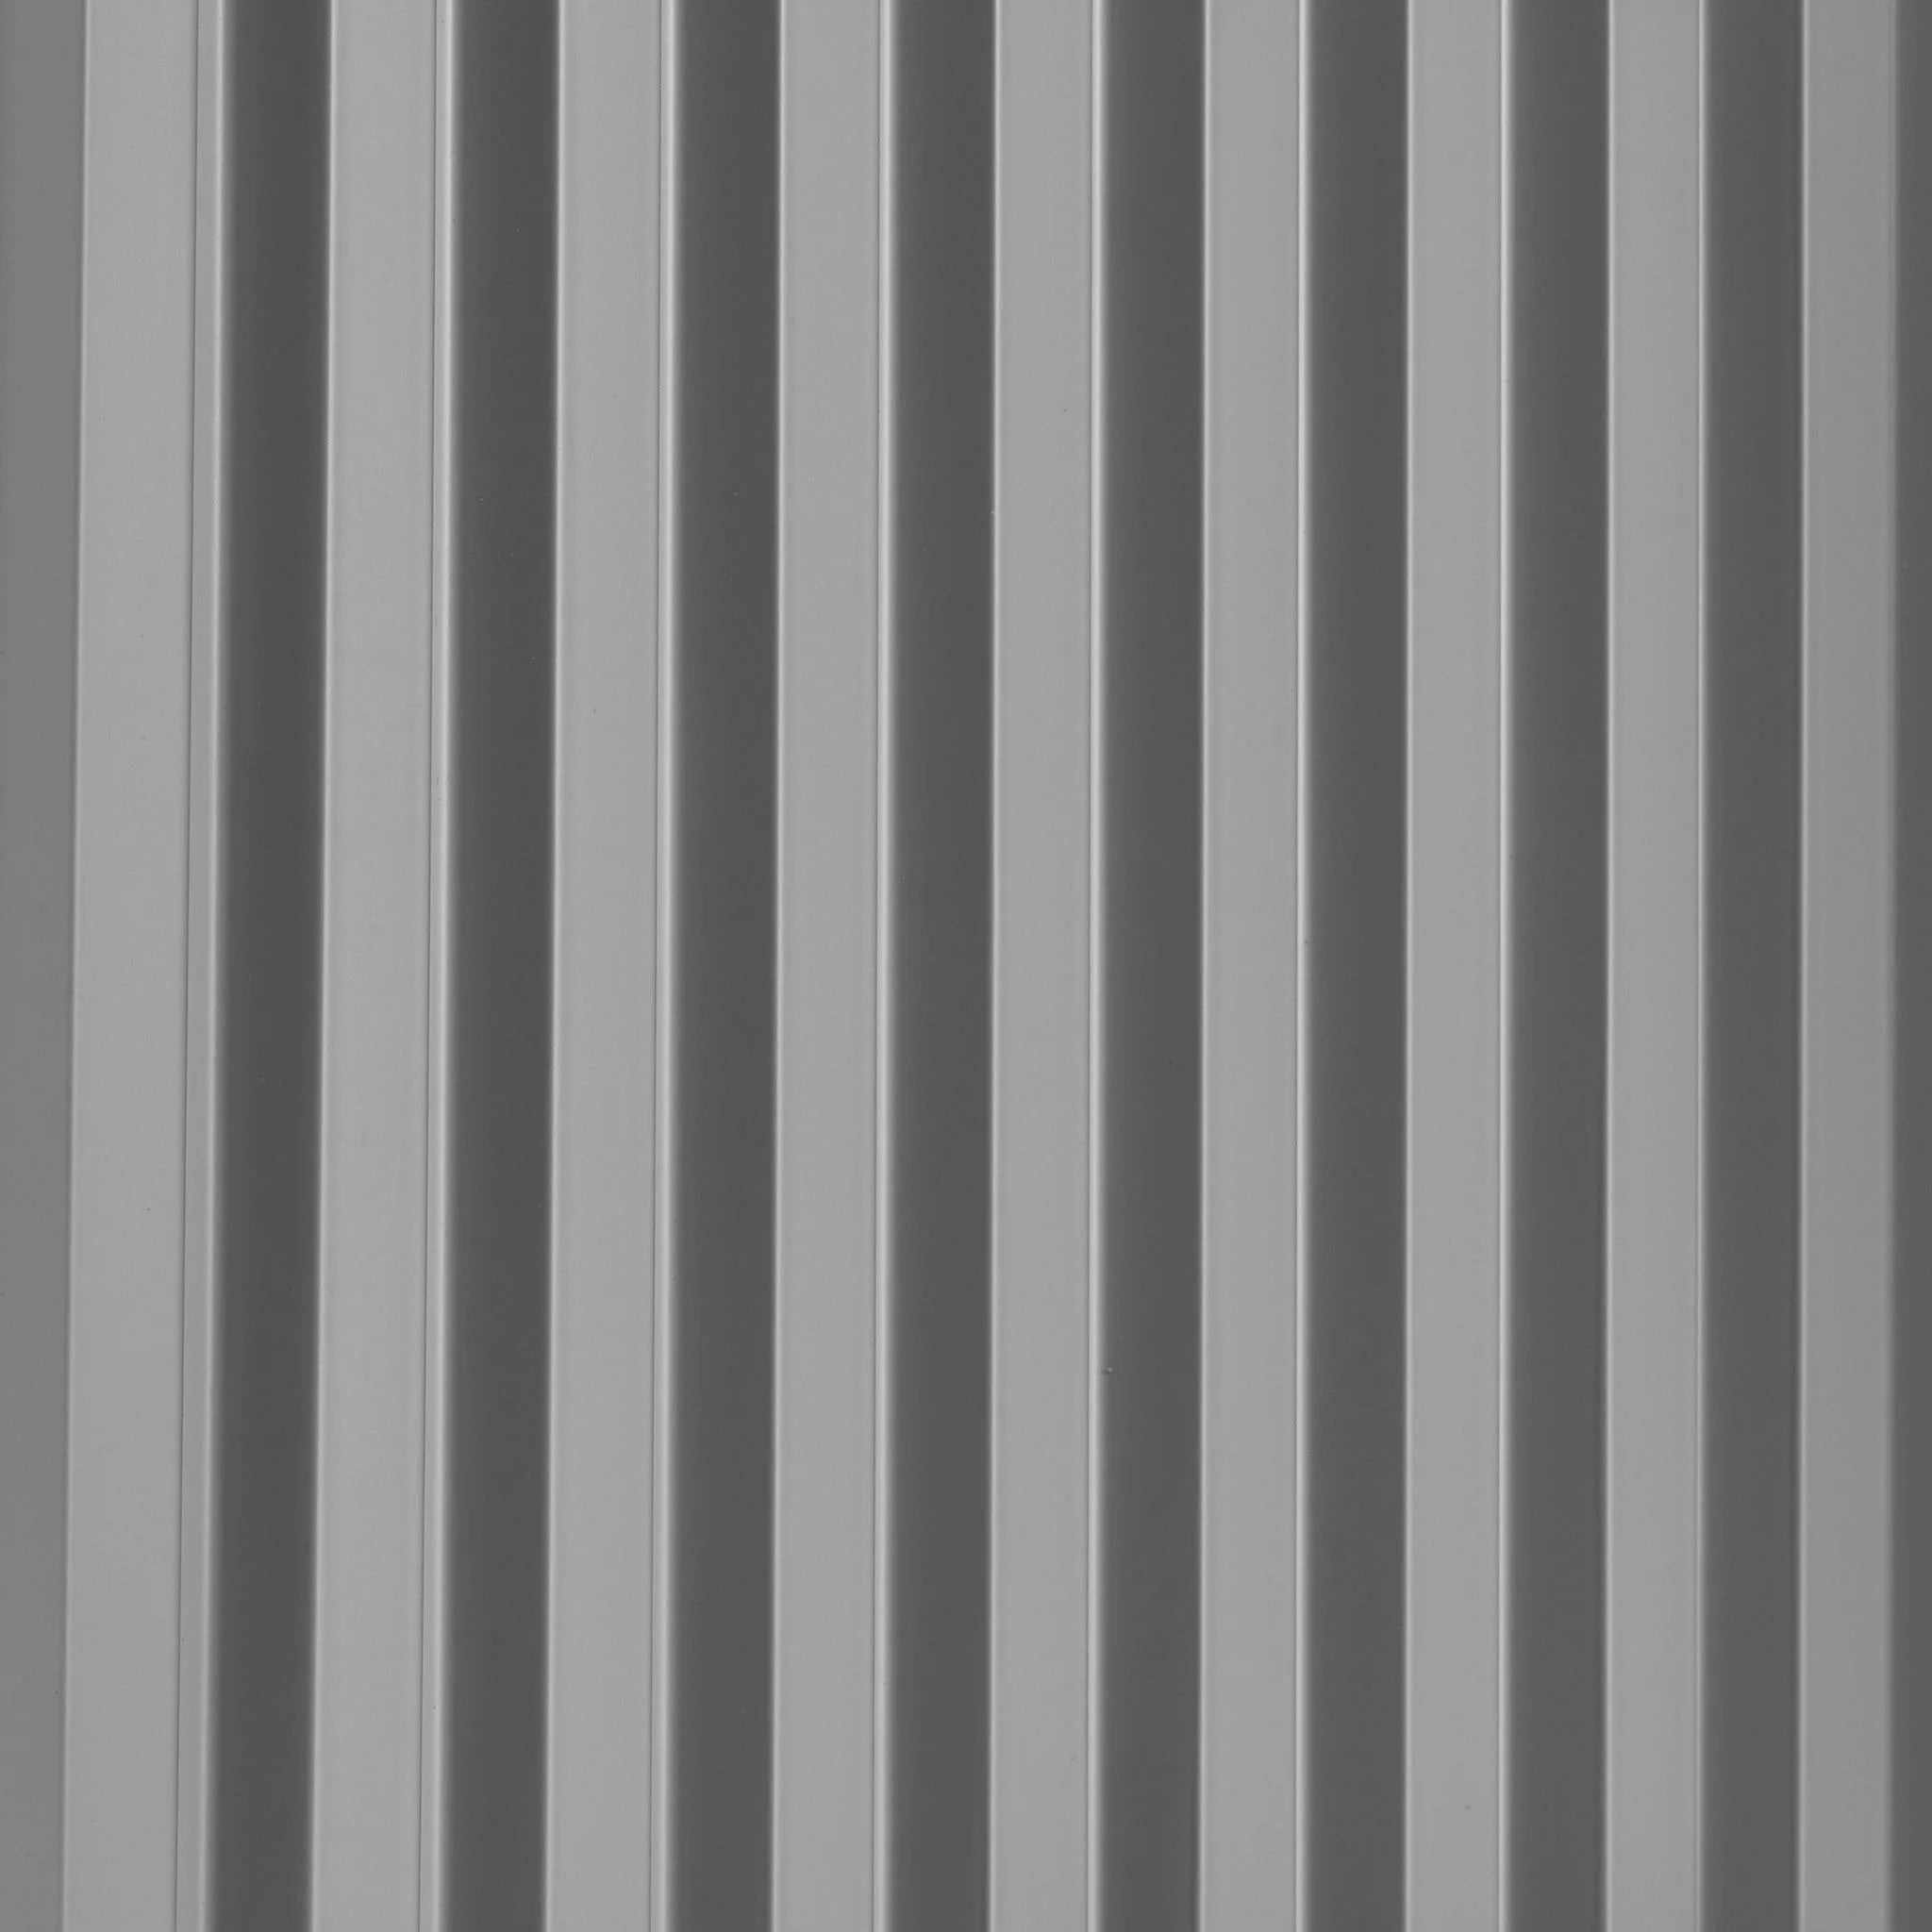 Close-up of grey PVC wall panel with vertical ribbed pattern